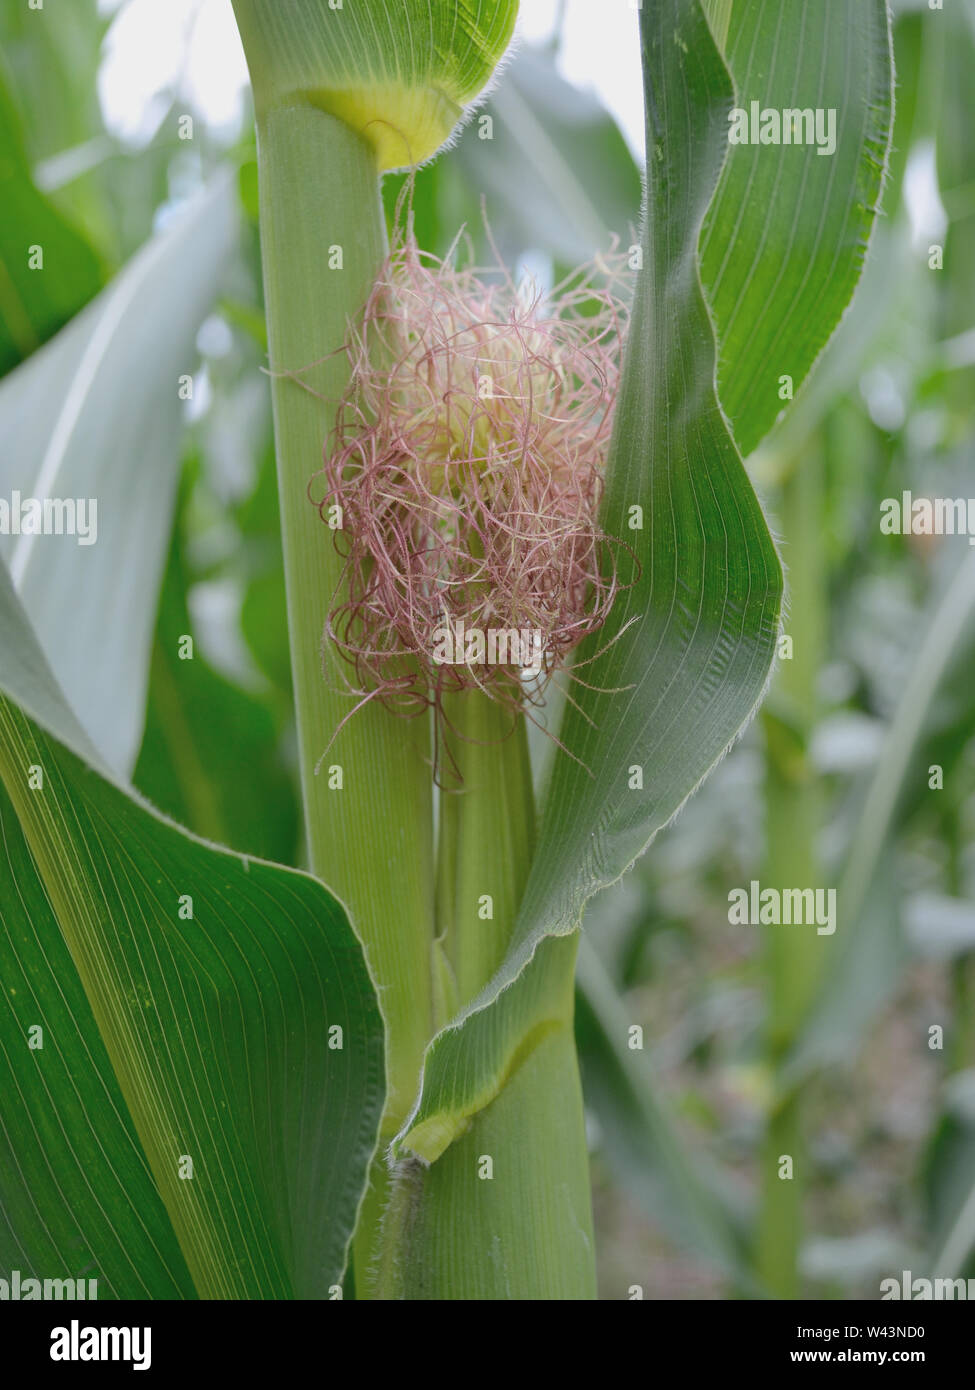 Stalks, ears, and silk of maize, corn, zea-mays Stock Photo